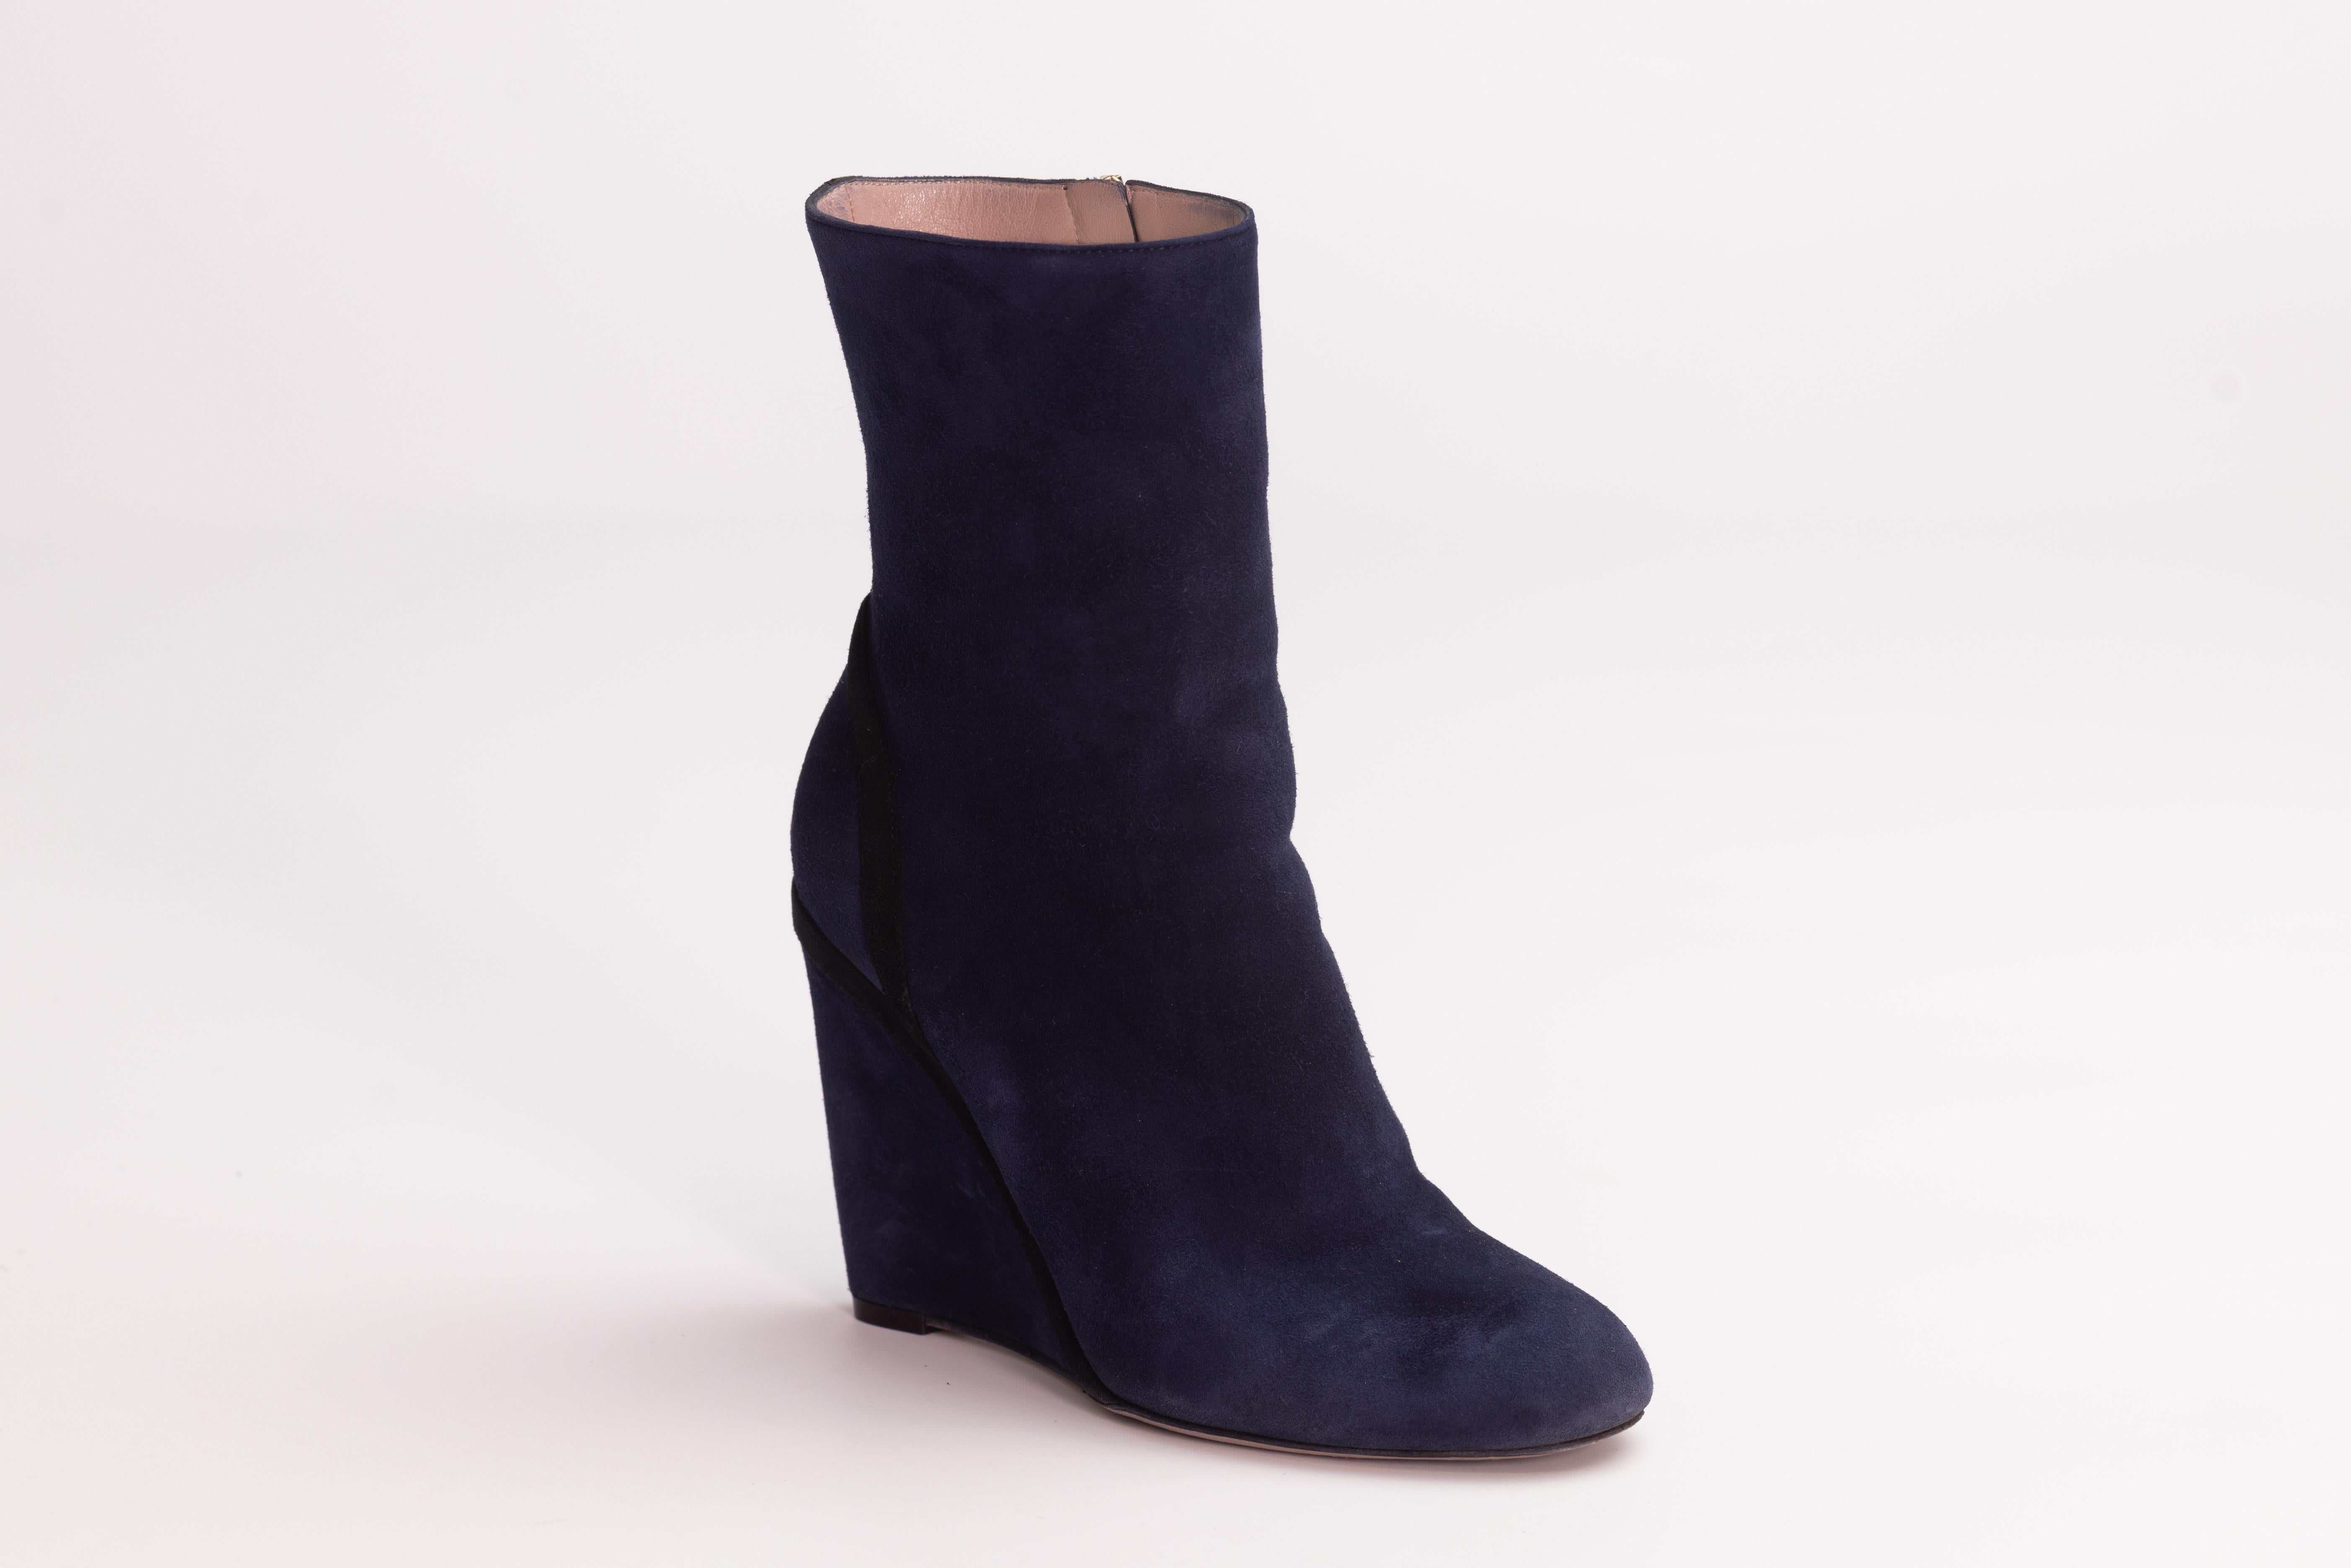 Color: Blue
Material: Suede
Model No.: 353741
Size: 38 EU / 7 US
Heel Height: 100 mm / 5”
Height of Boot Leg: 7”
Comes With: Box
Condition: Good. Scratches. And stains to the bottoms. Light marks thought out.

Made in Italy